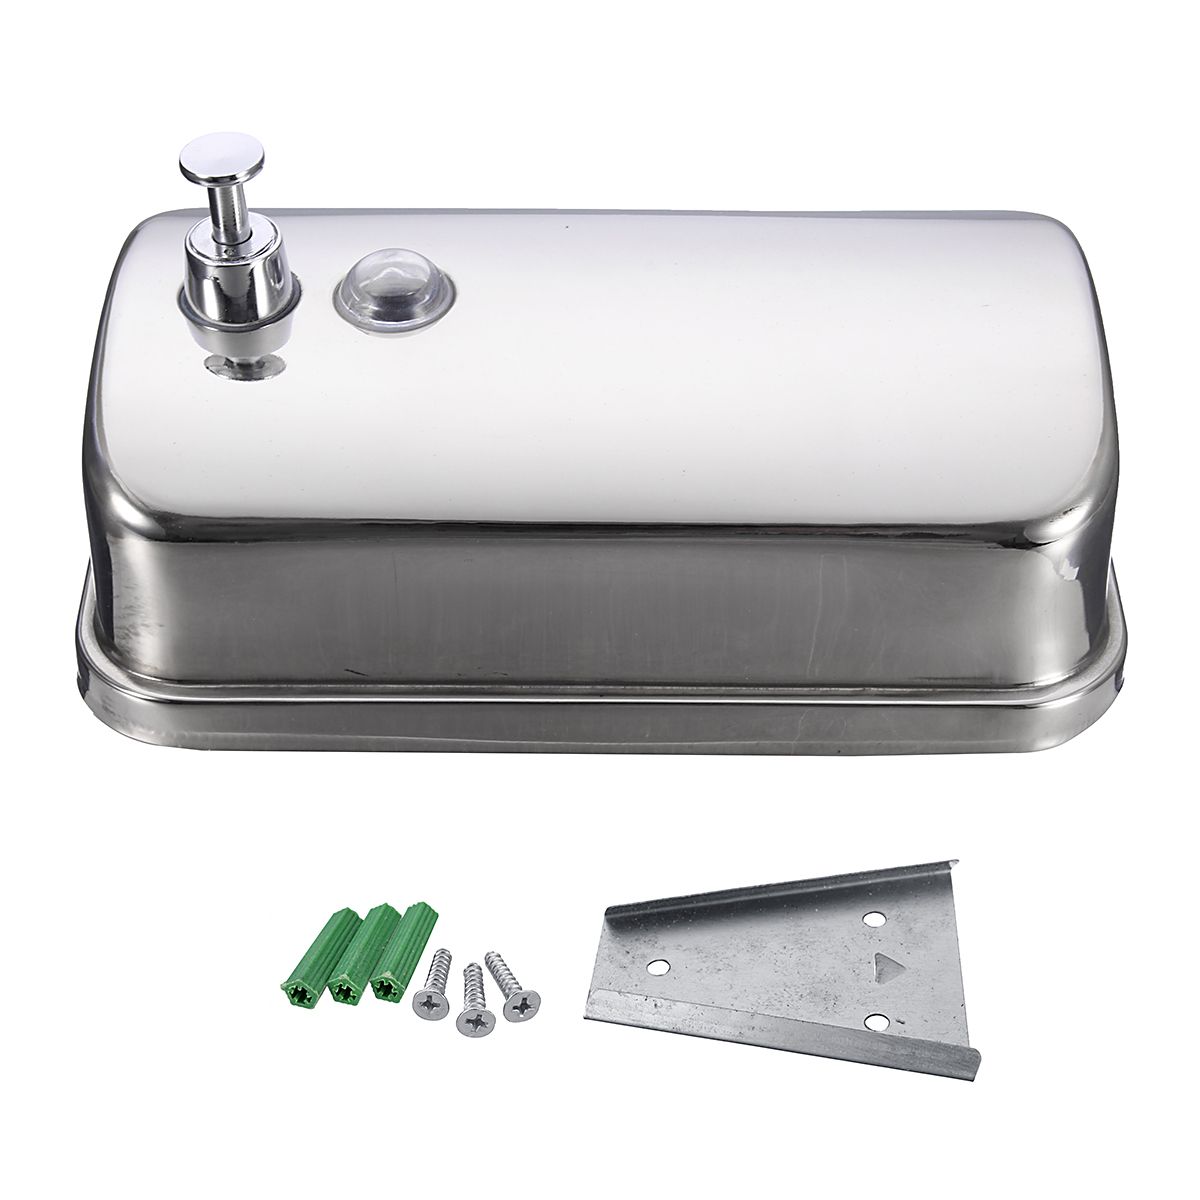 Bathroom-Kitchen-Stainless-Steel-Wall-Mounted-Lotion-Pump-Soap-Shampoo-Dispenser-1265805